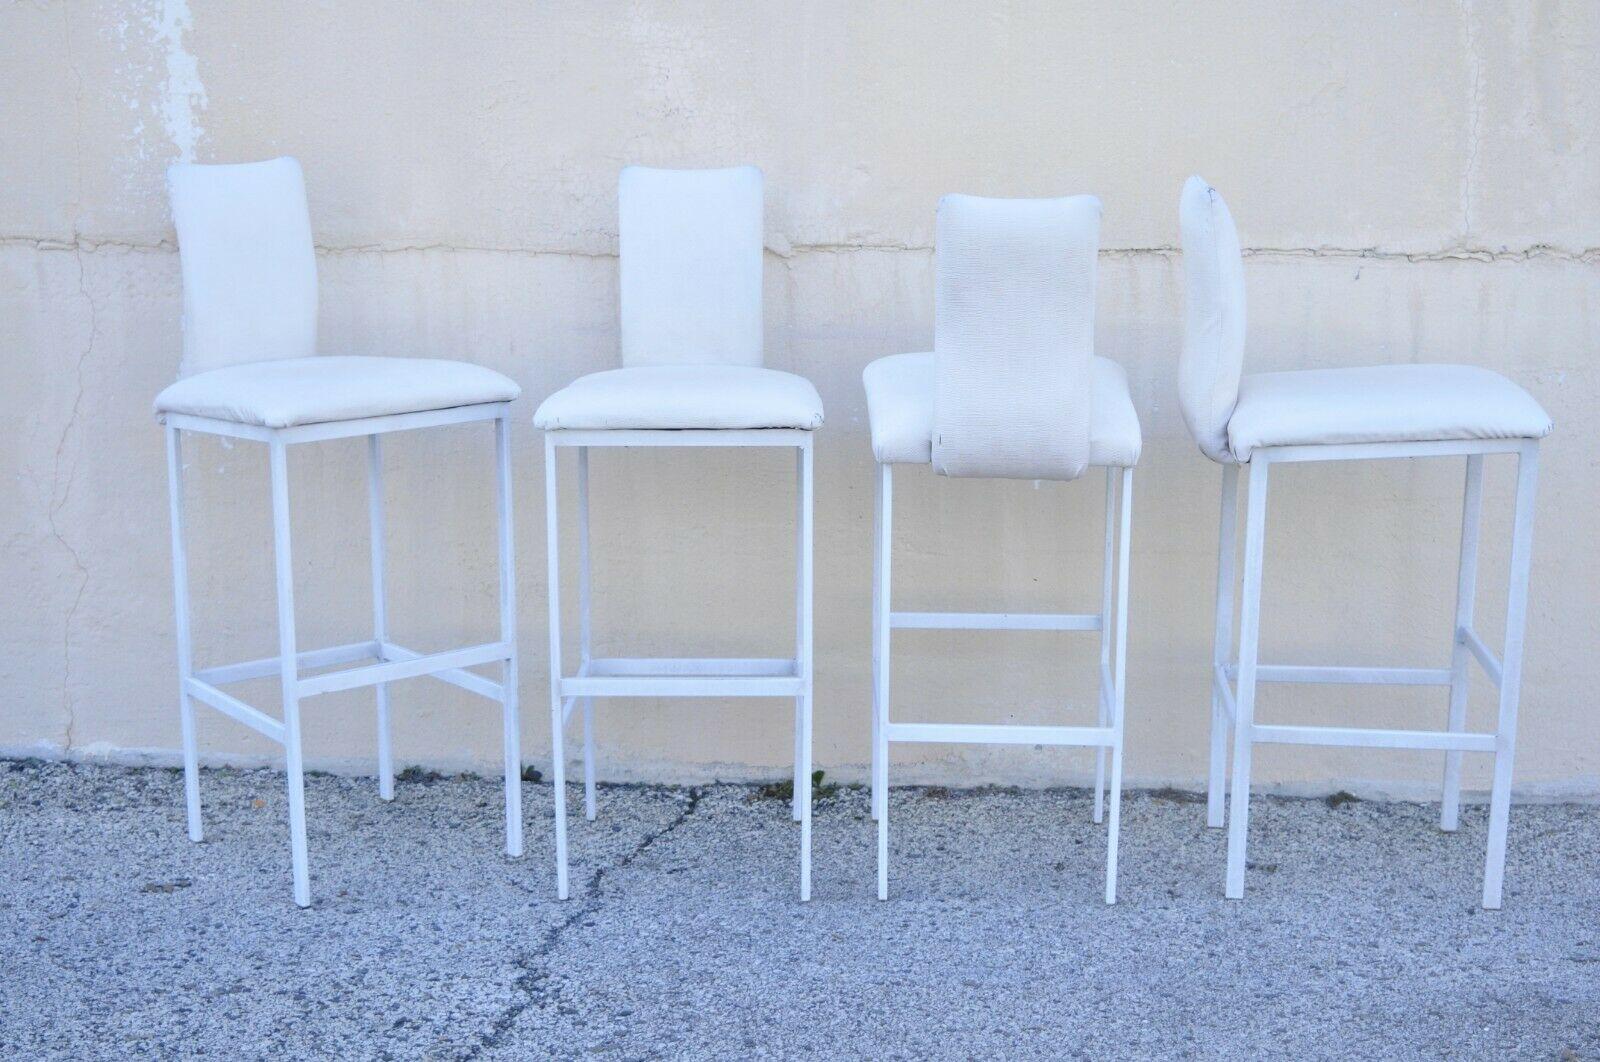 Minson Ent. Contemporary Modern White Metal Sculpted Barstools - Set of 4. Item features metal frames, upholstered back and seat, original label, clean modernist lines, great style and form. Circa Late 20th Century. Measurements: 42